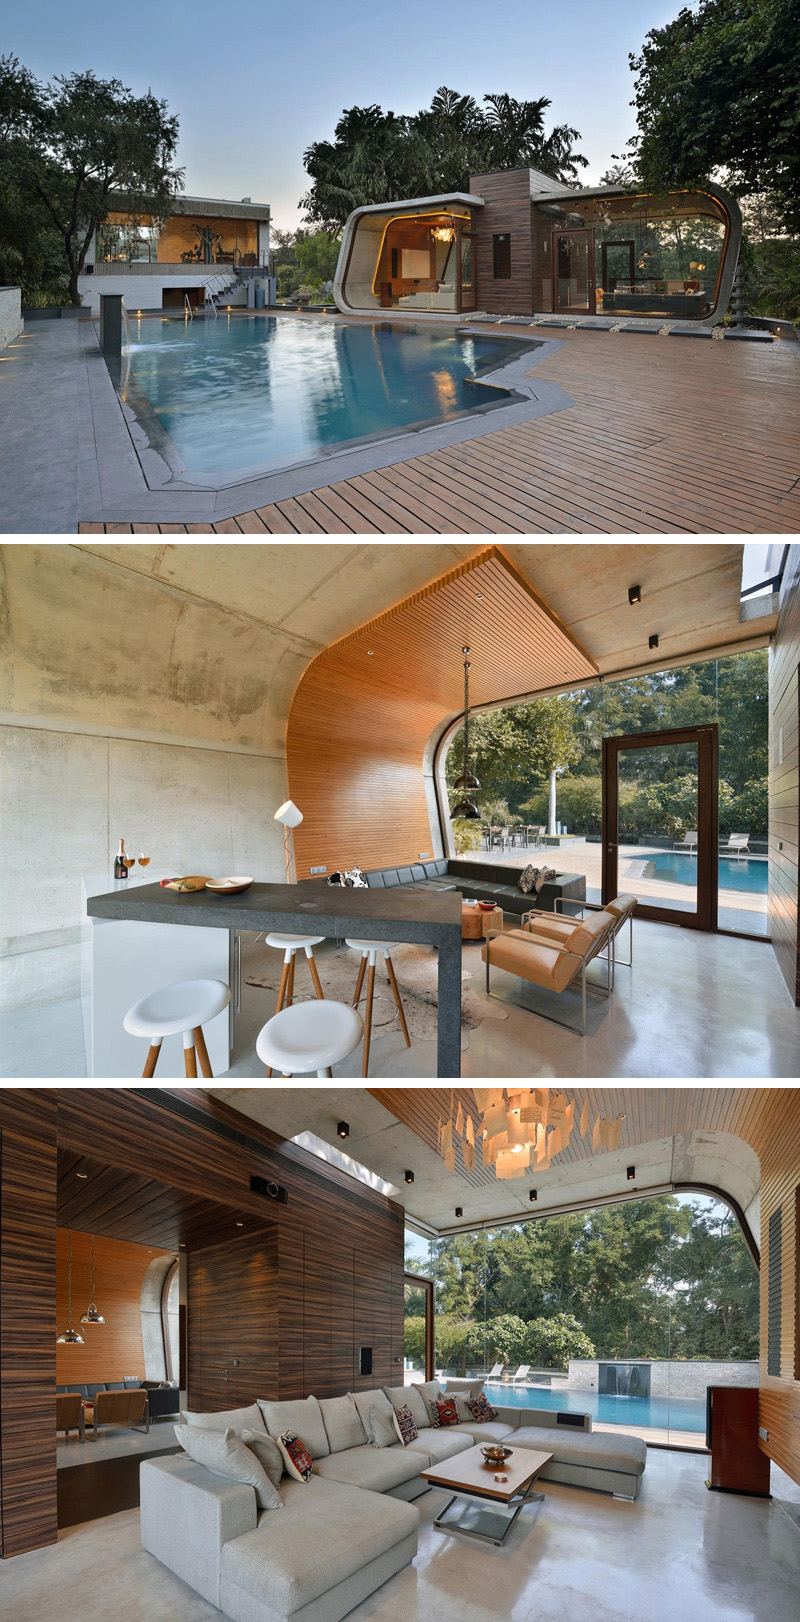 This curved concrete and wood pool house provides plenty of space to relax, and enjoy views of outside through the floor-to-ceiling windows.